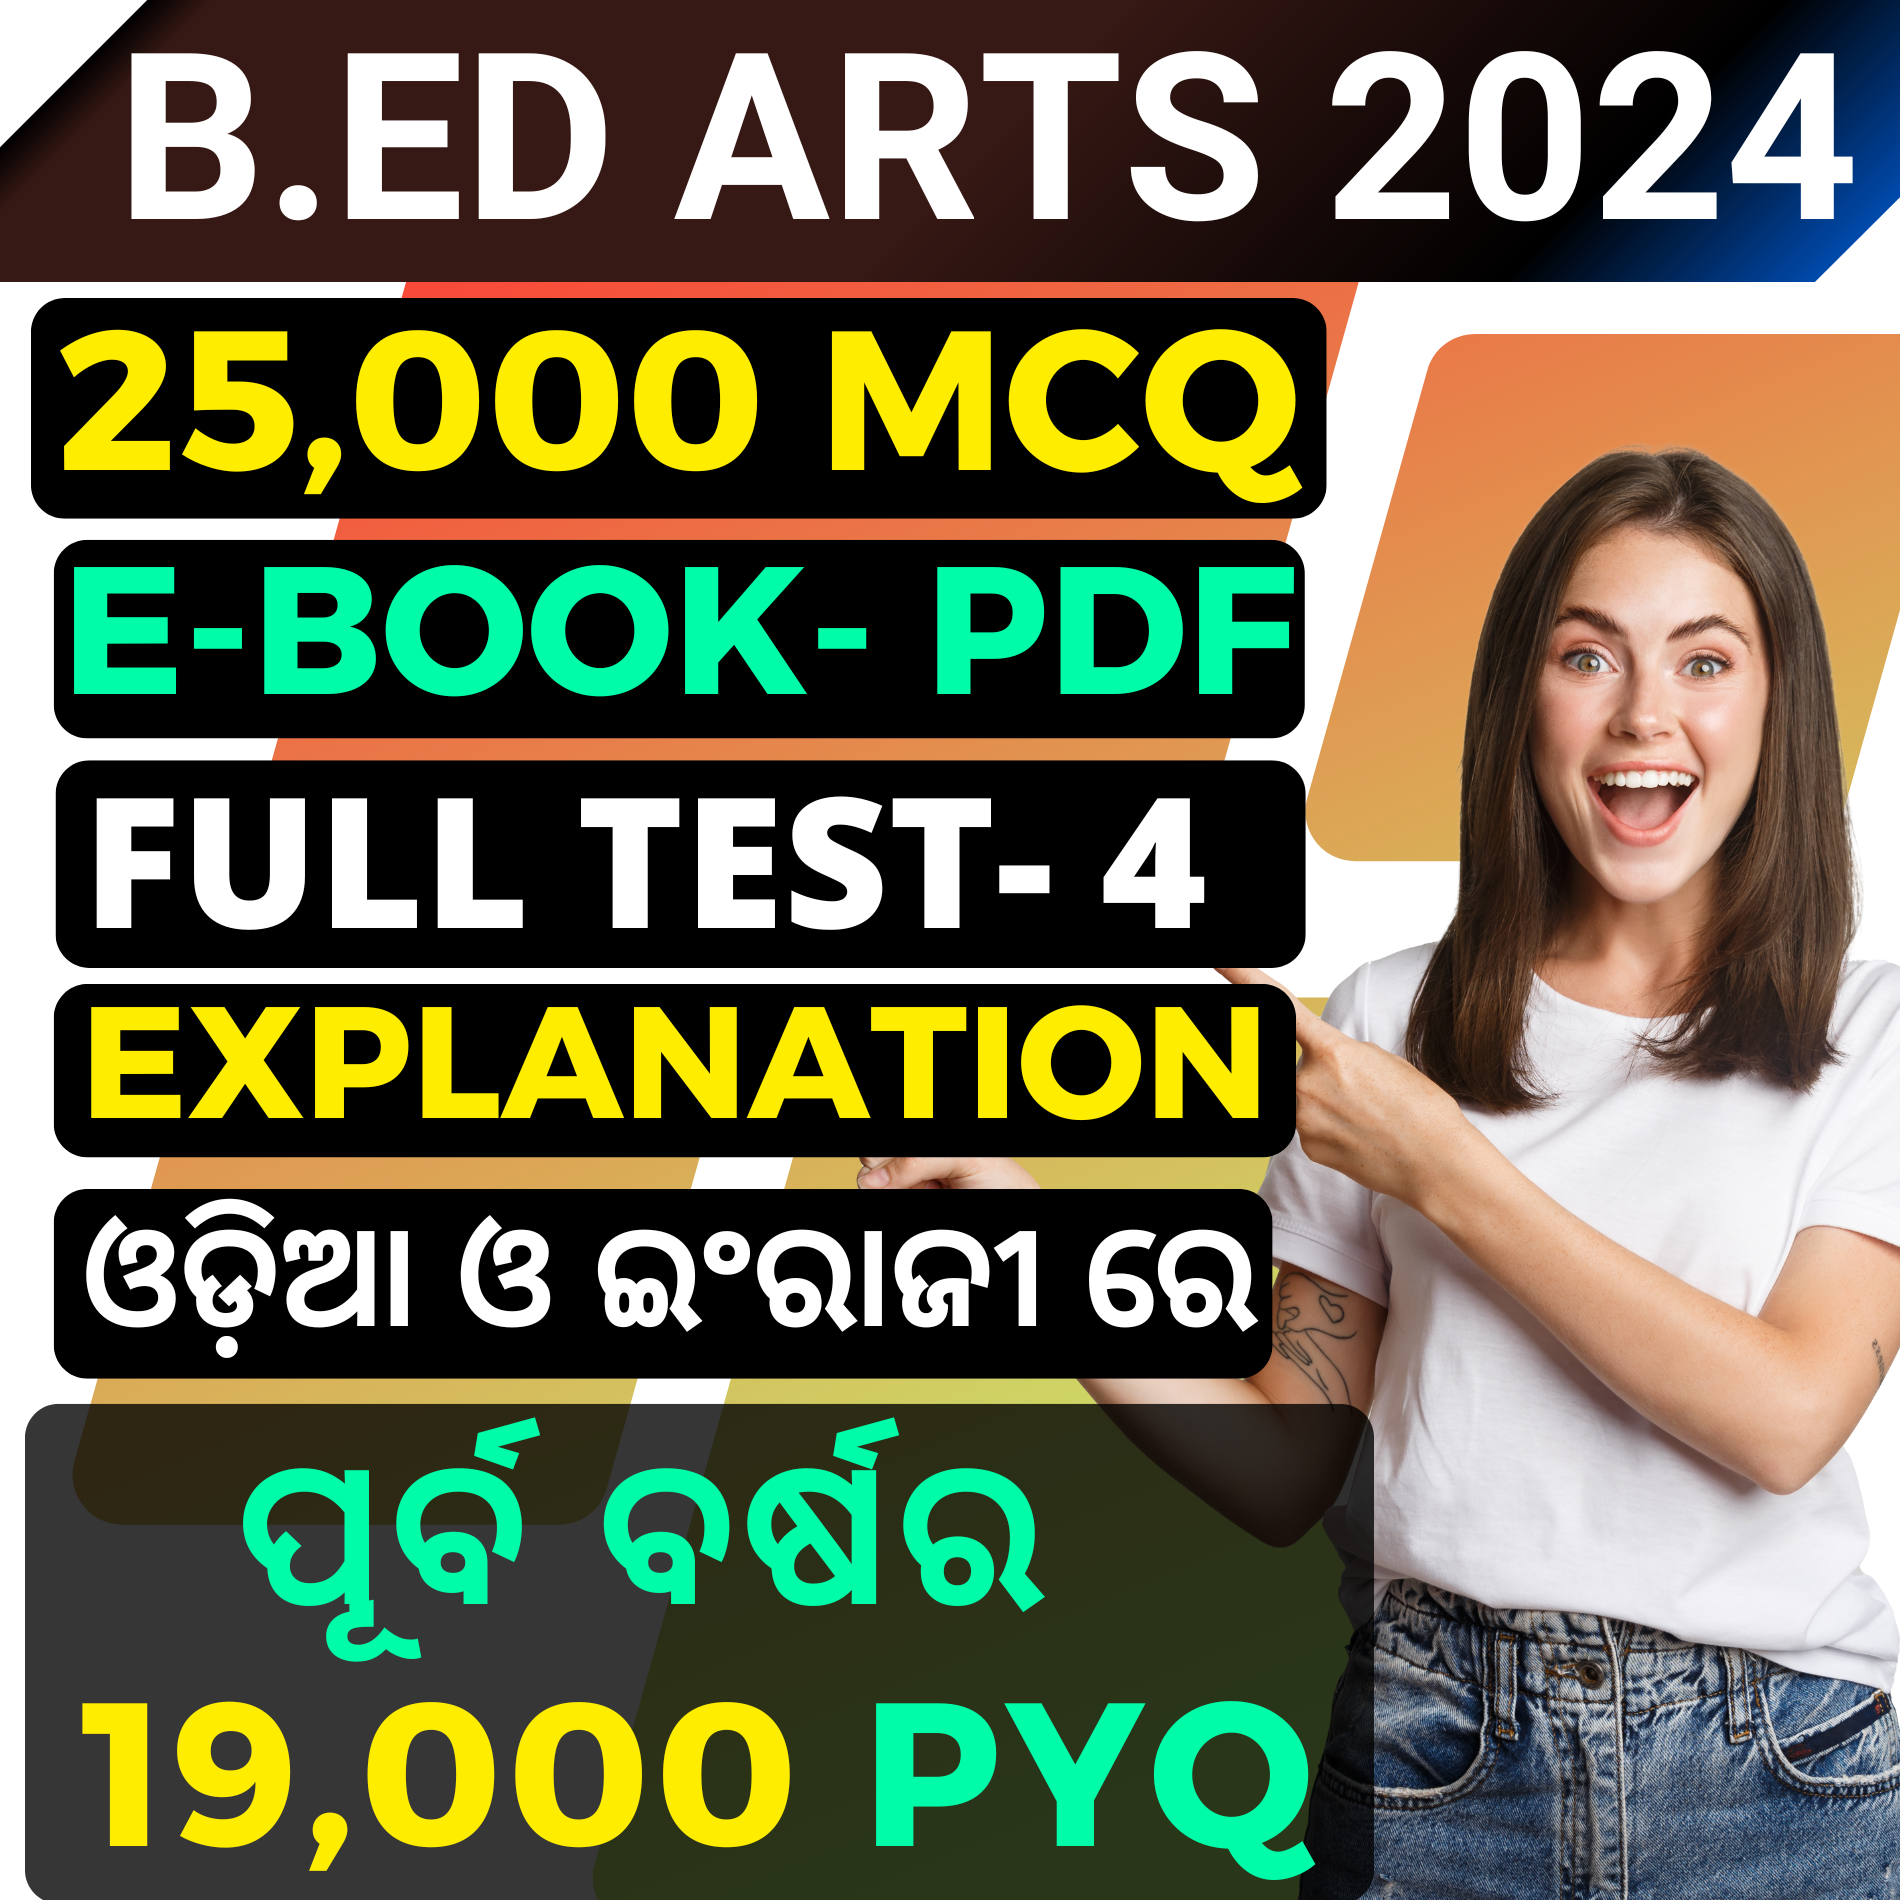 U- ODISHA B.ED ARTS ENTRANCE 2024 E-BOOKS + 4 FULL TEST !! CHAPTER WISE BEST 25,000 MCQ +  ALL PREVIOUS YEAR QUESTIONS